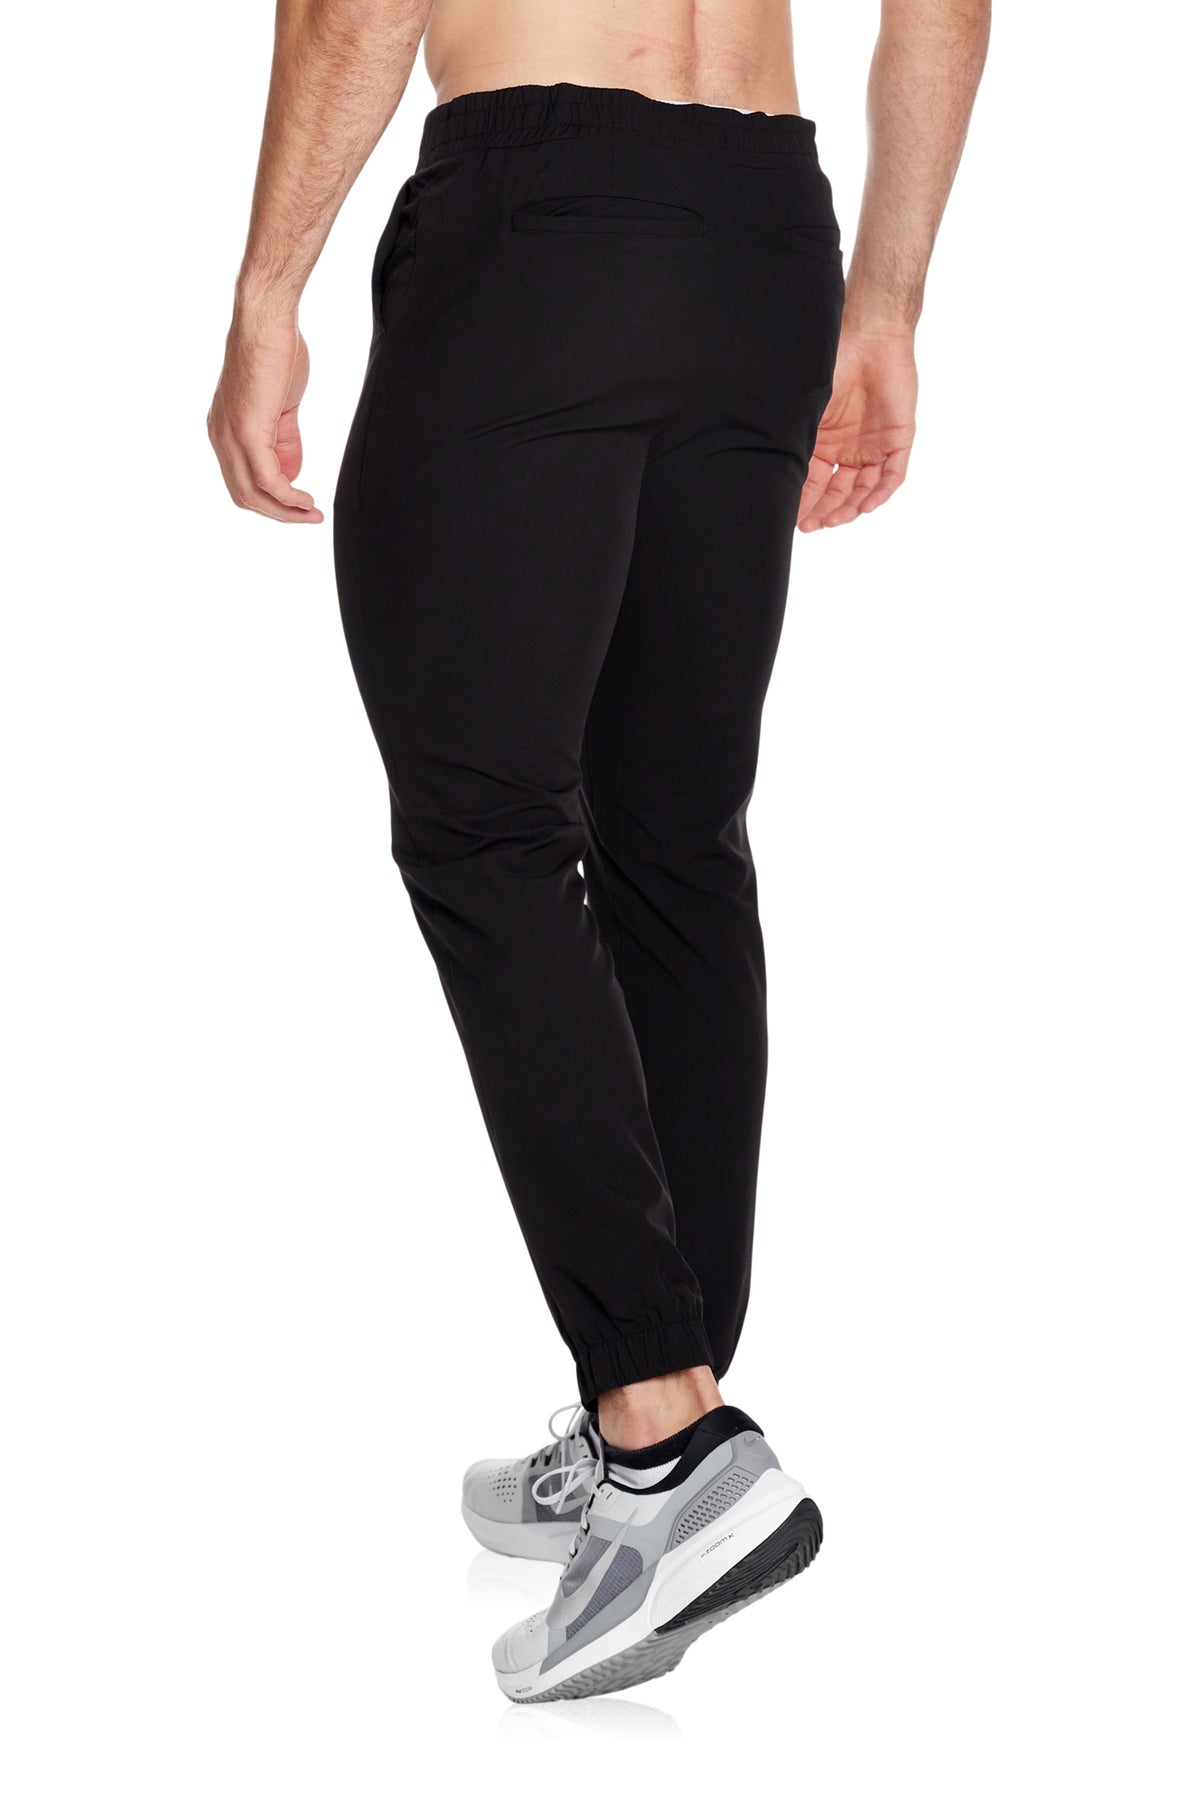 Almost full stock of OTF woven joggers. Great price too! What are